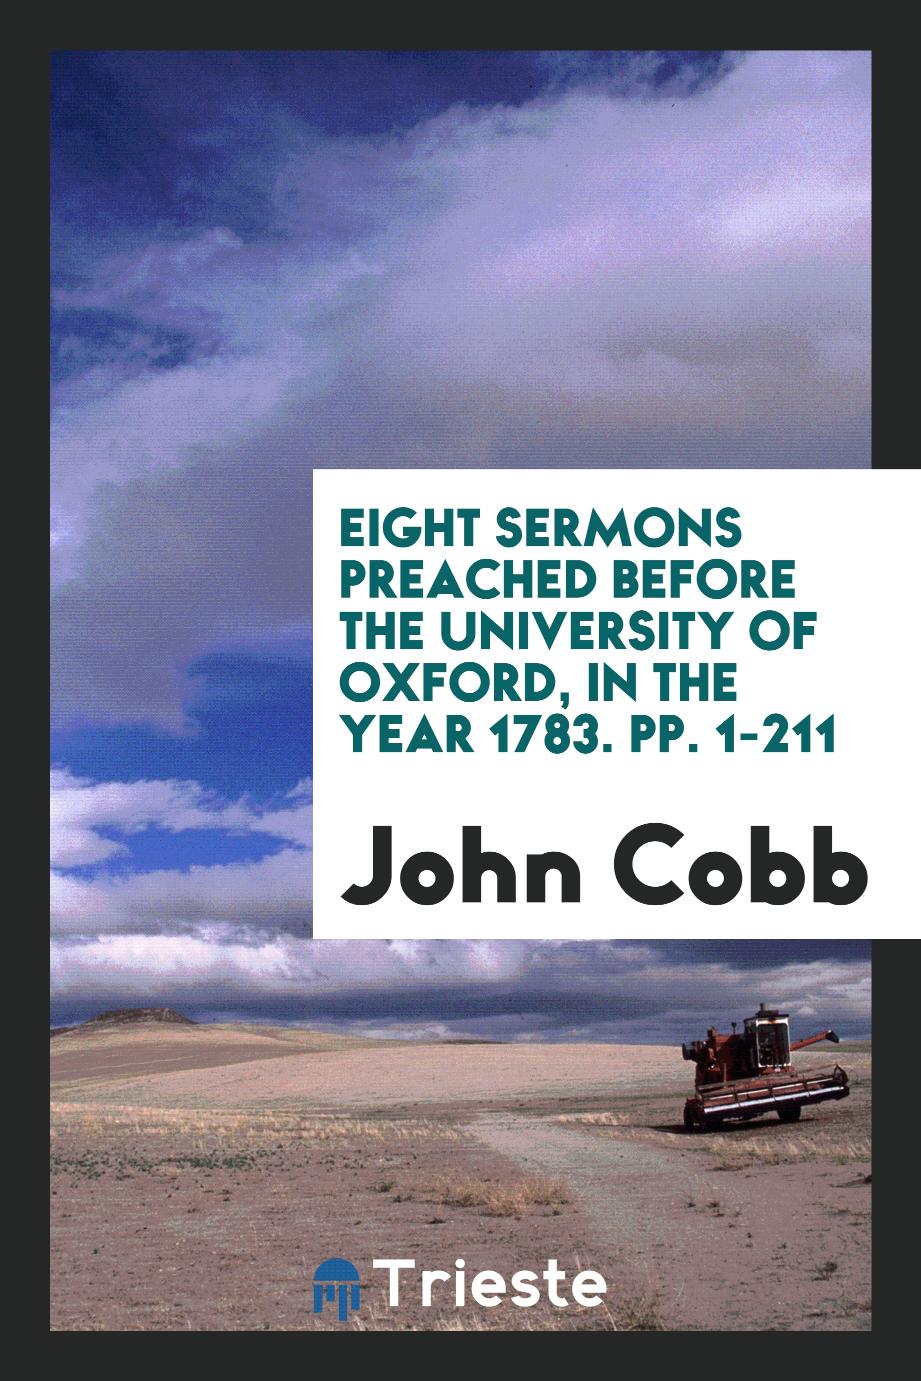 John Cobb - Eight Sermons Preached Before the University of Oxford, in the Year 1783. pp. 1-211